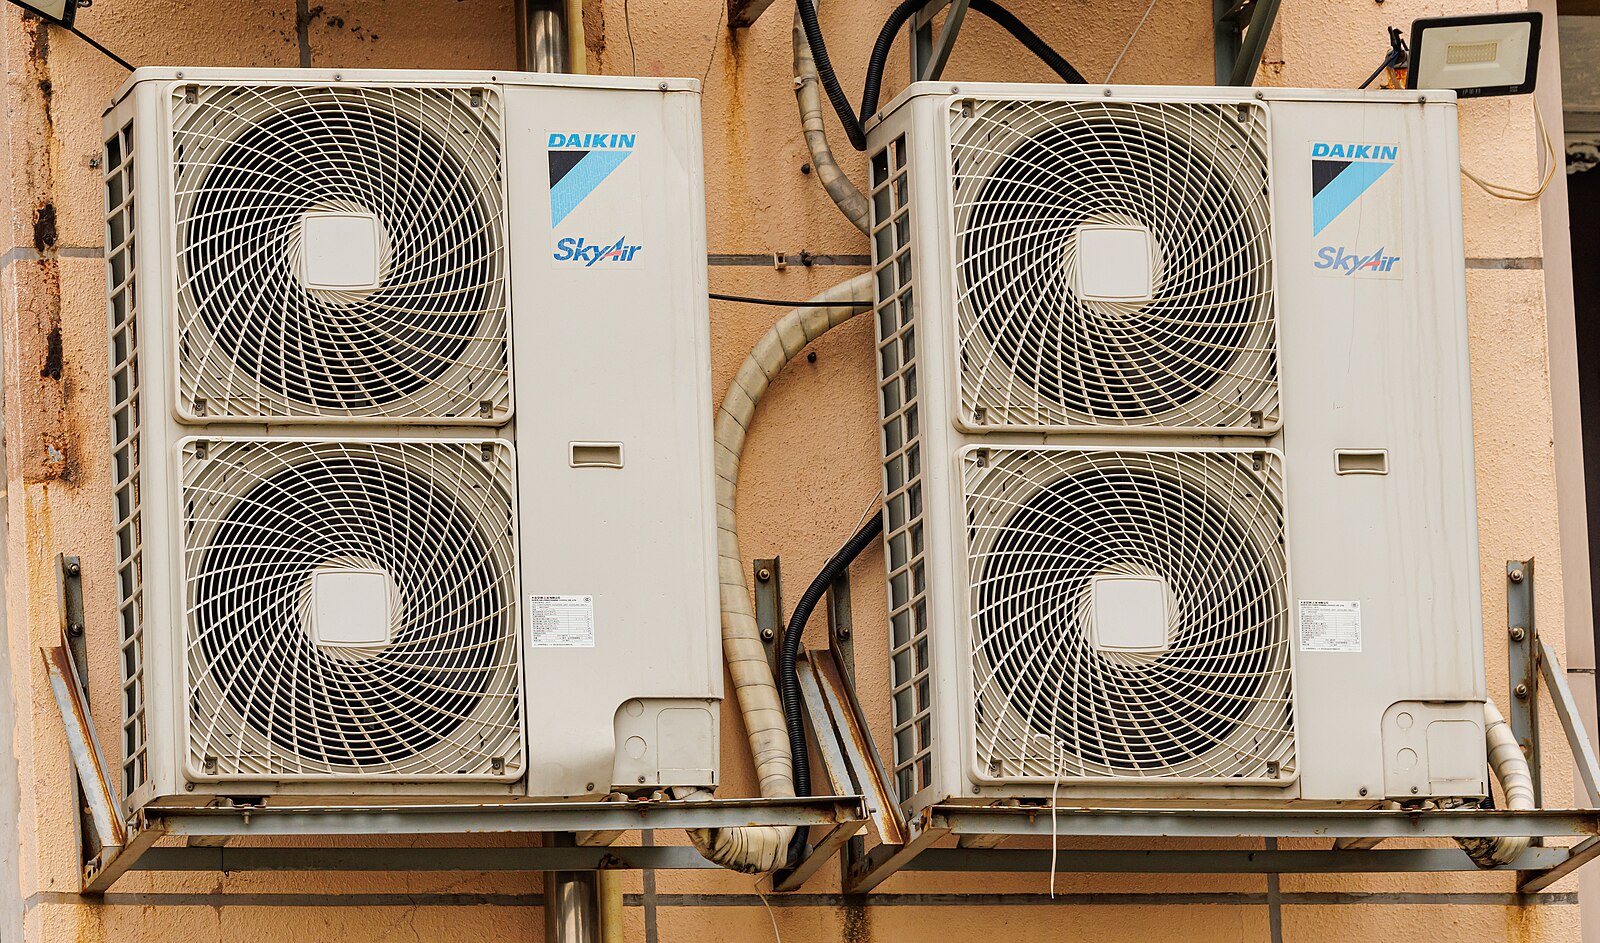 how to clear daikin fault codes